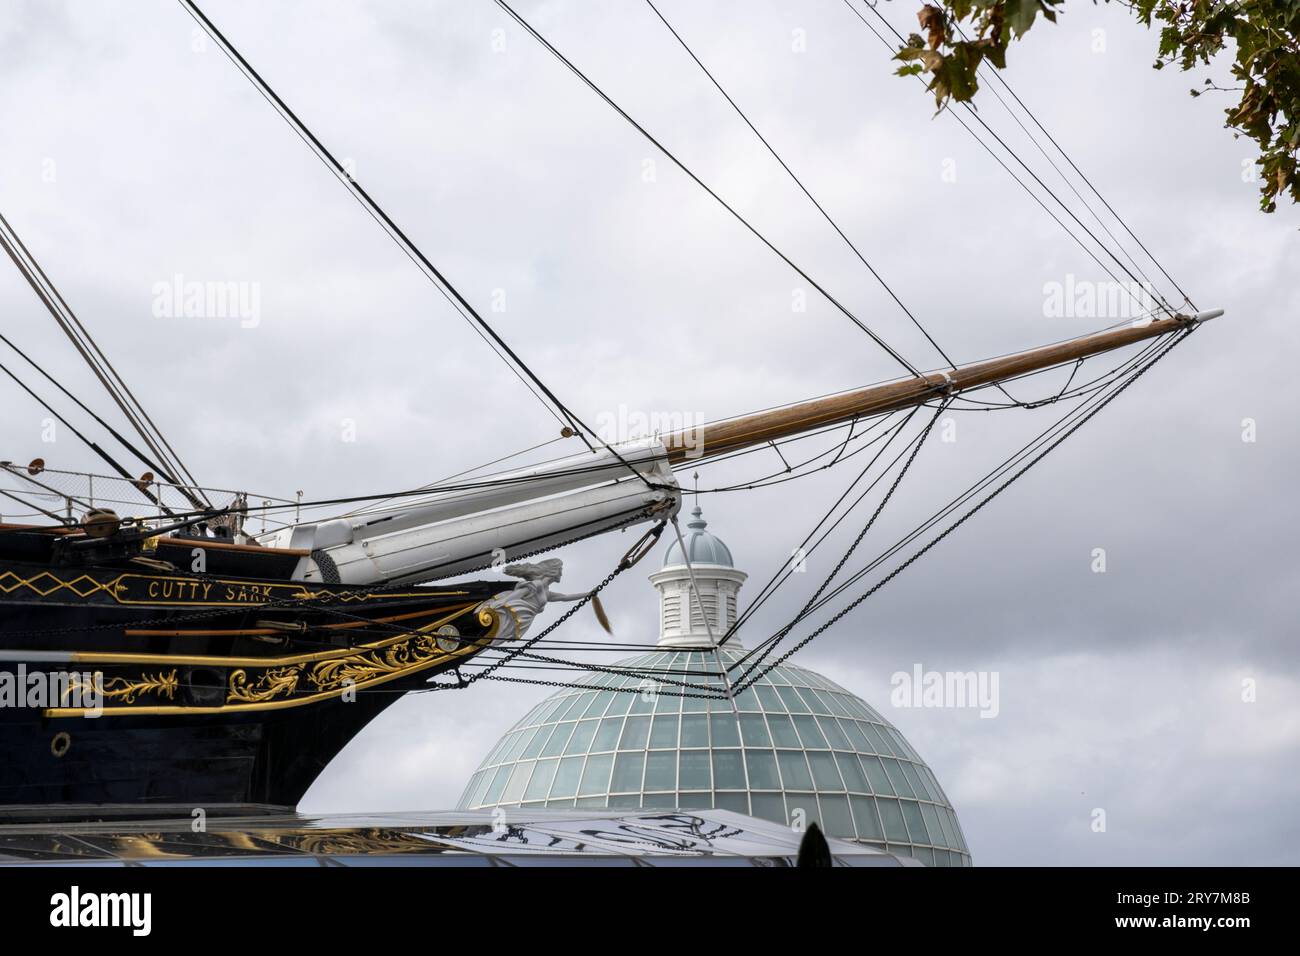 Detail of the bow of the Cutty Sark tea clipper tall ship museum in dry dock at Greenwich, South-East London Stock Photo